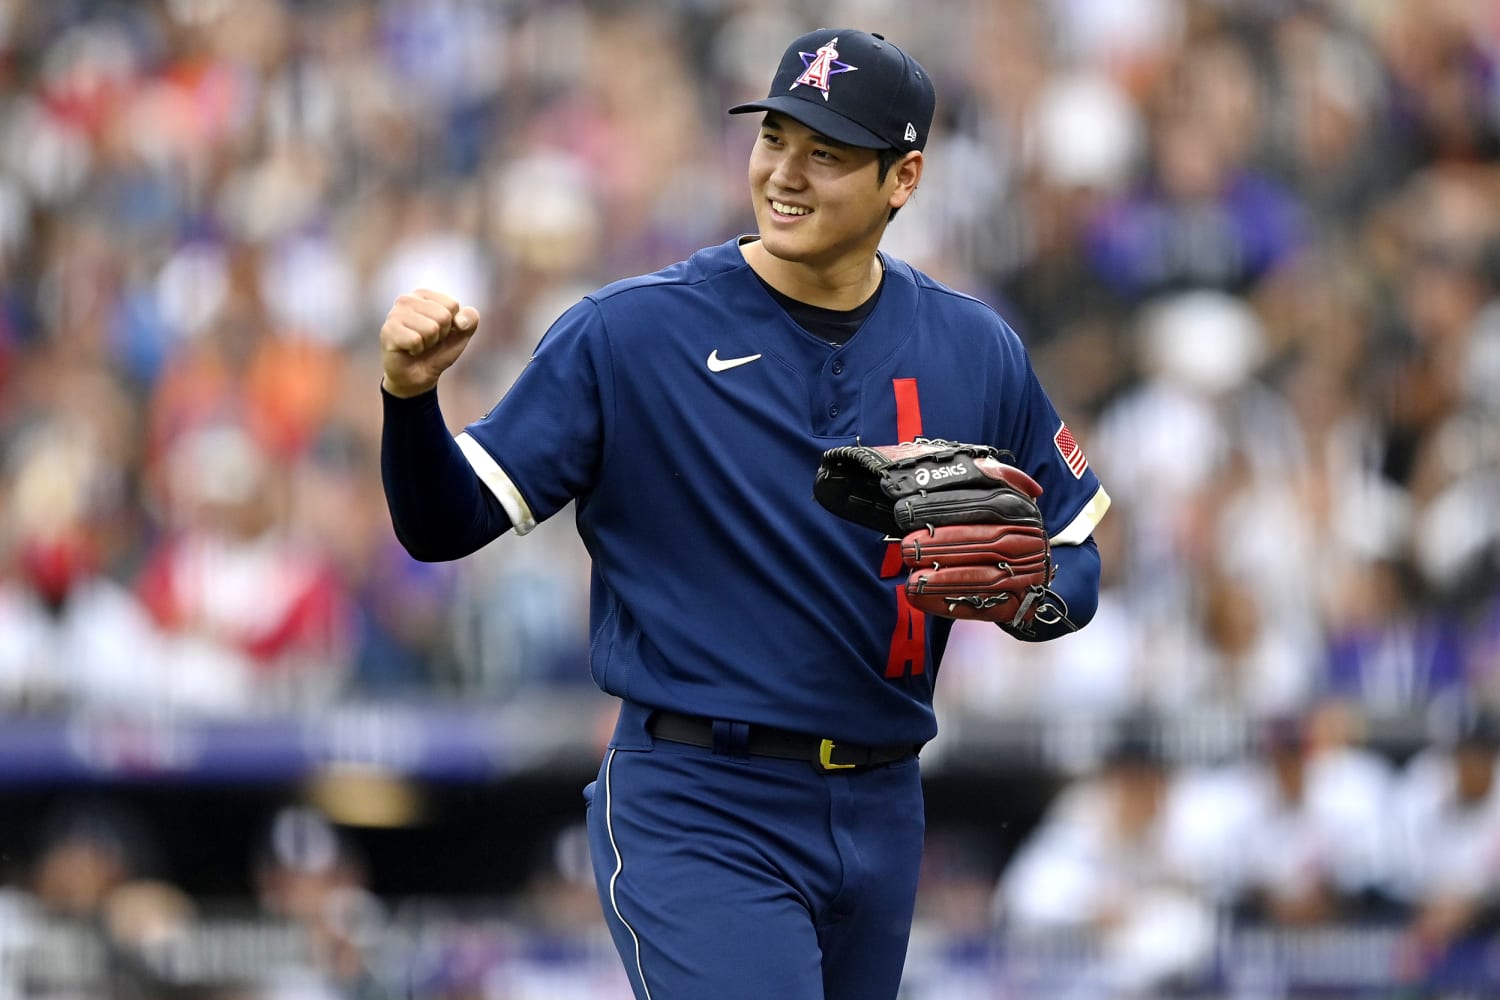 MLB rumors: Shohei Ohtani, 'Japan's Babe Ruth', to Yankees after